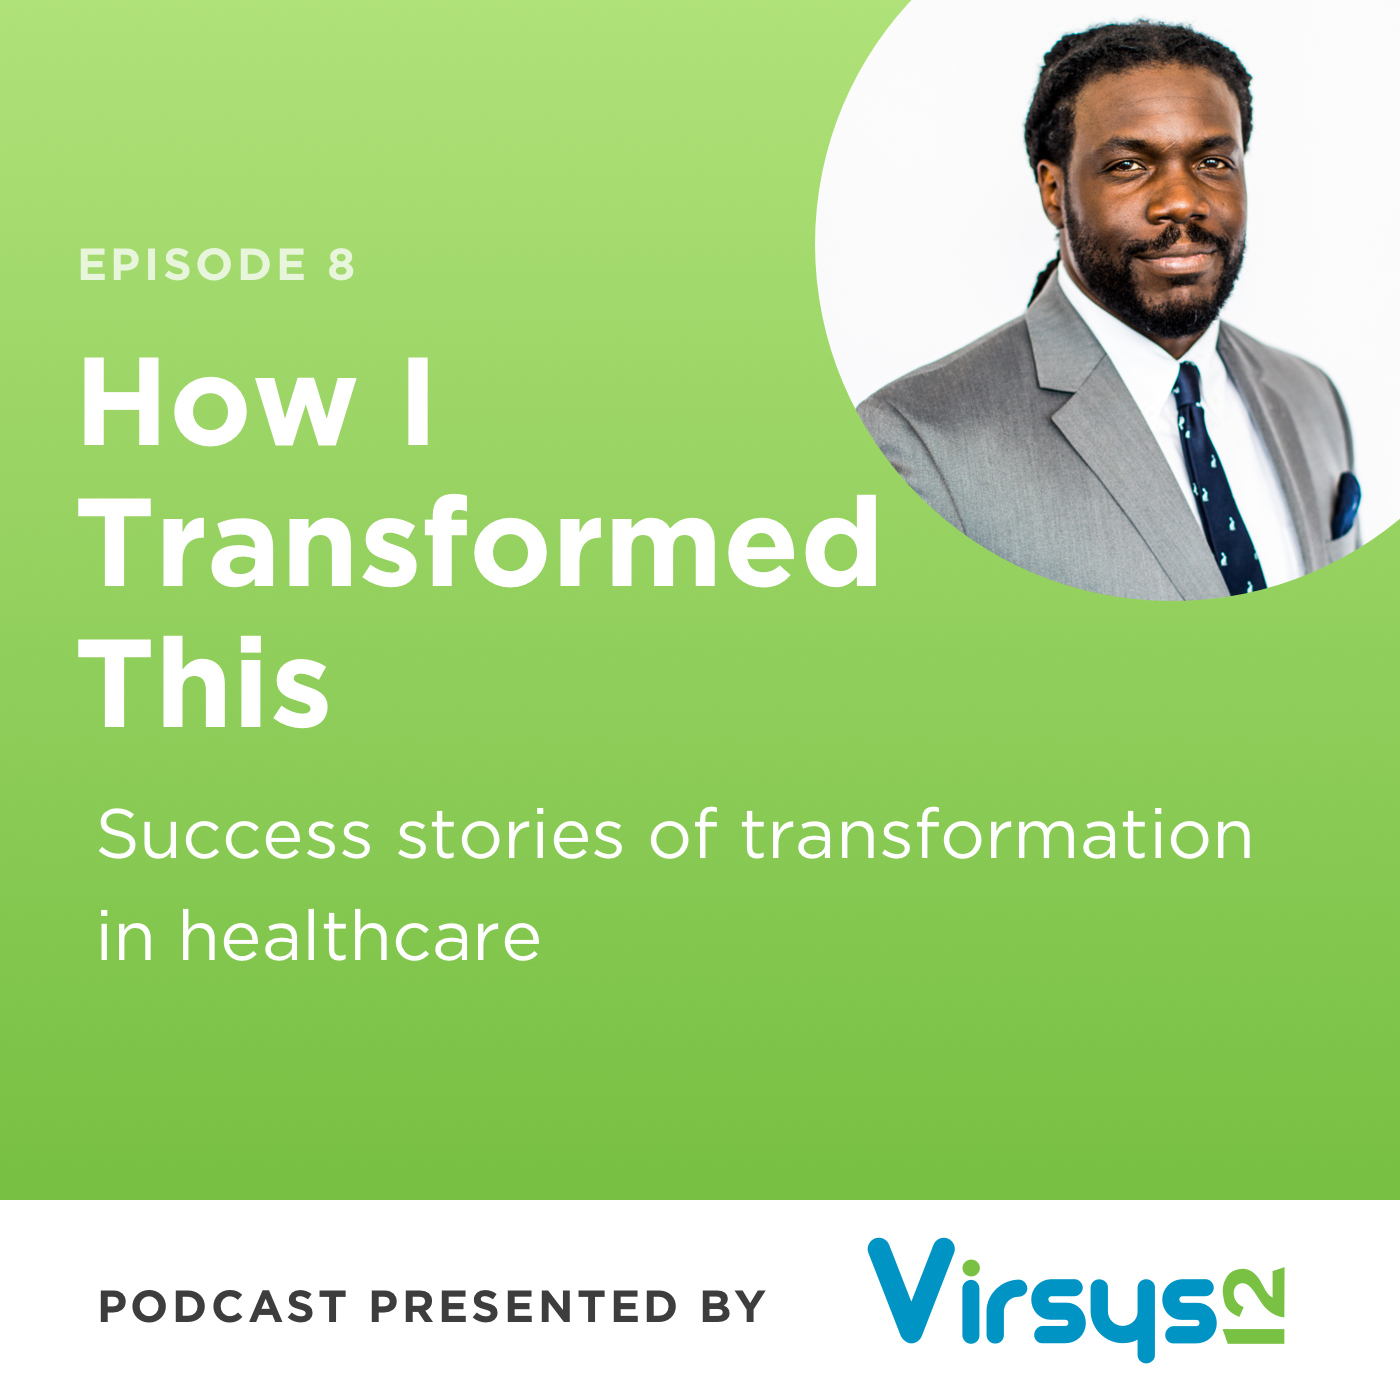 Marcus Whitney on How I Transformed This